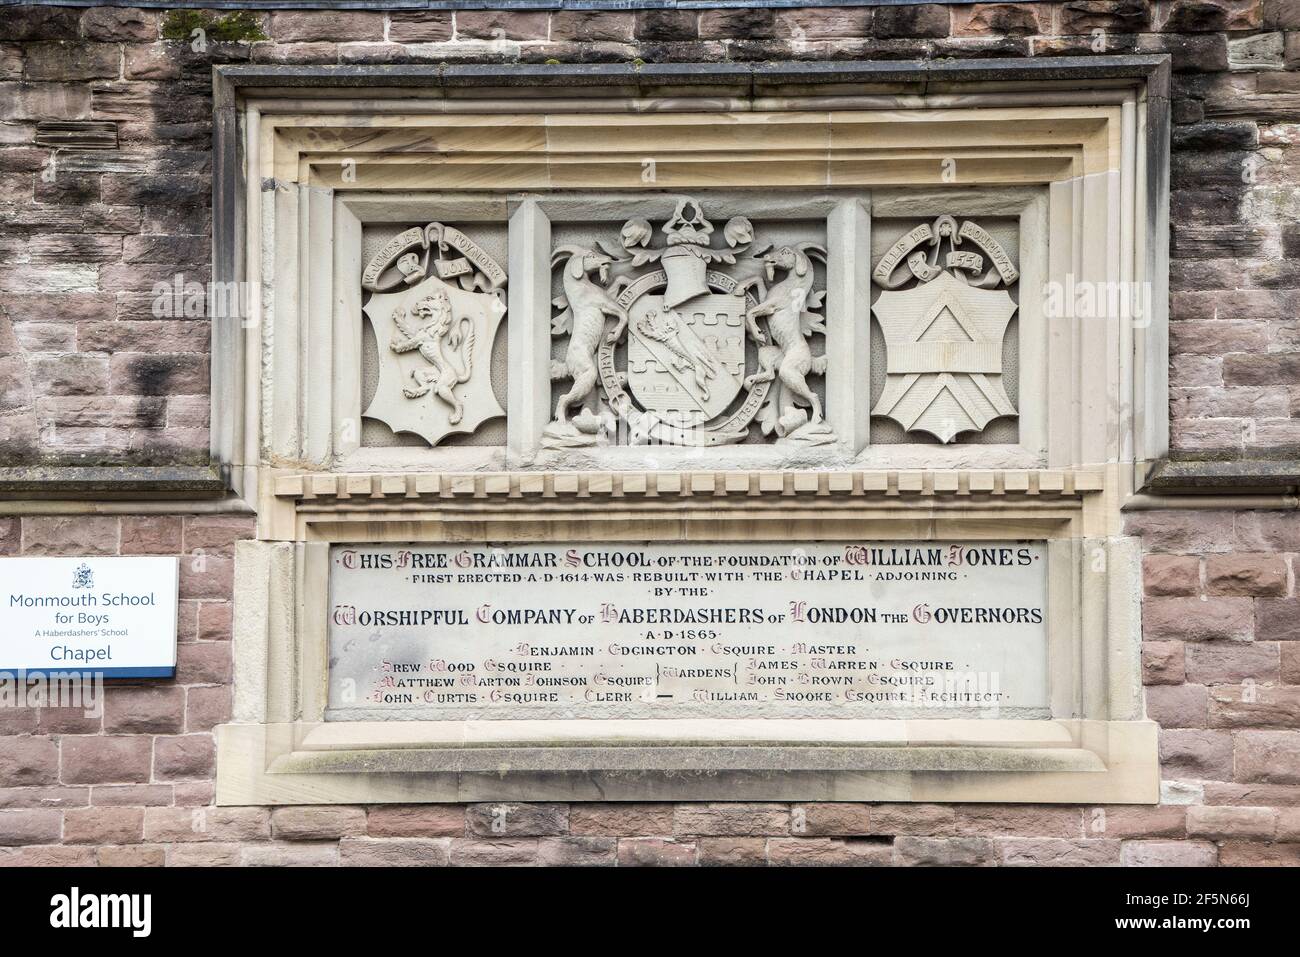 Plaque and shield commemorating the Free Grammar School, Monmouth School for Boys, Monmouth, Wales, UK Stock Photo